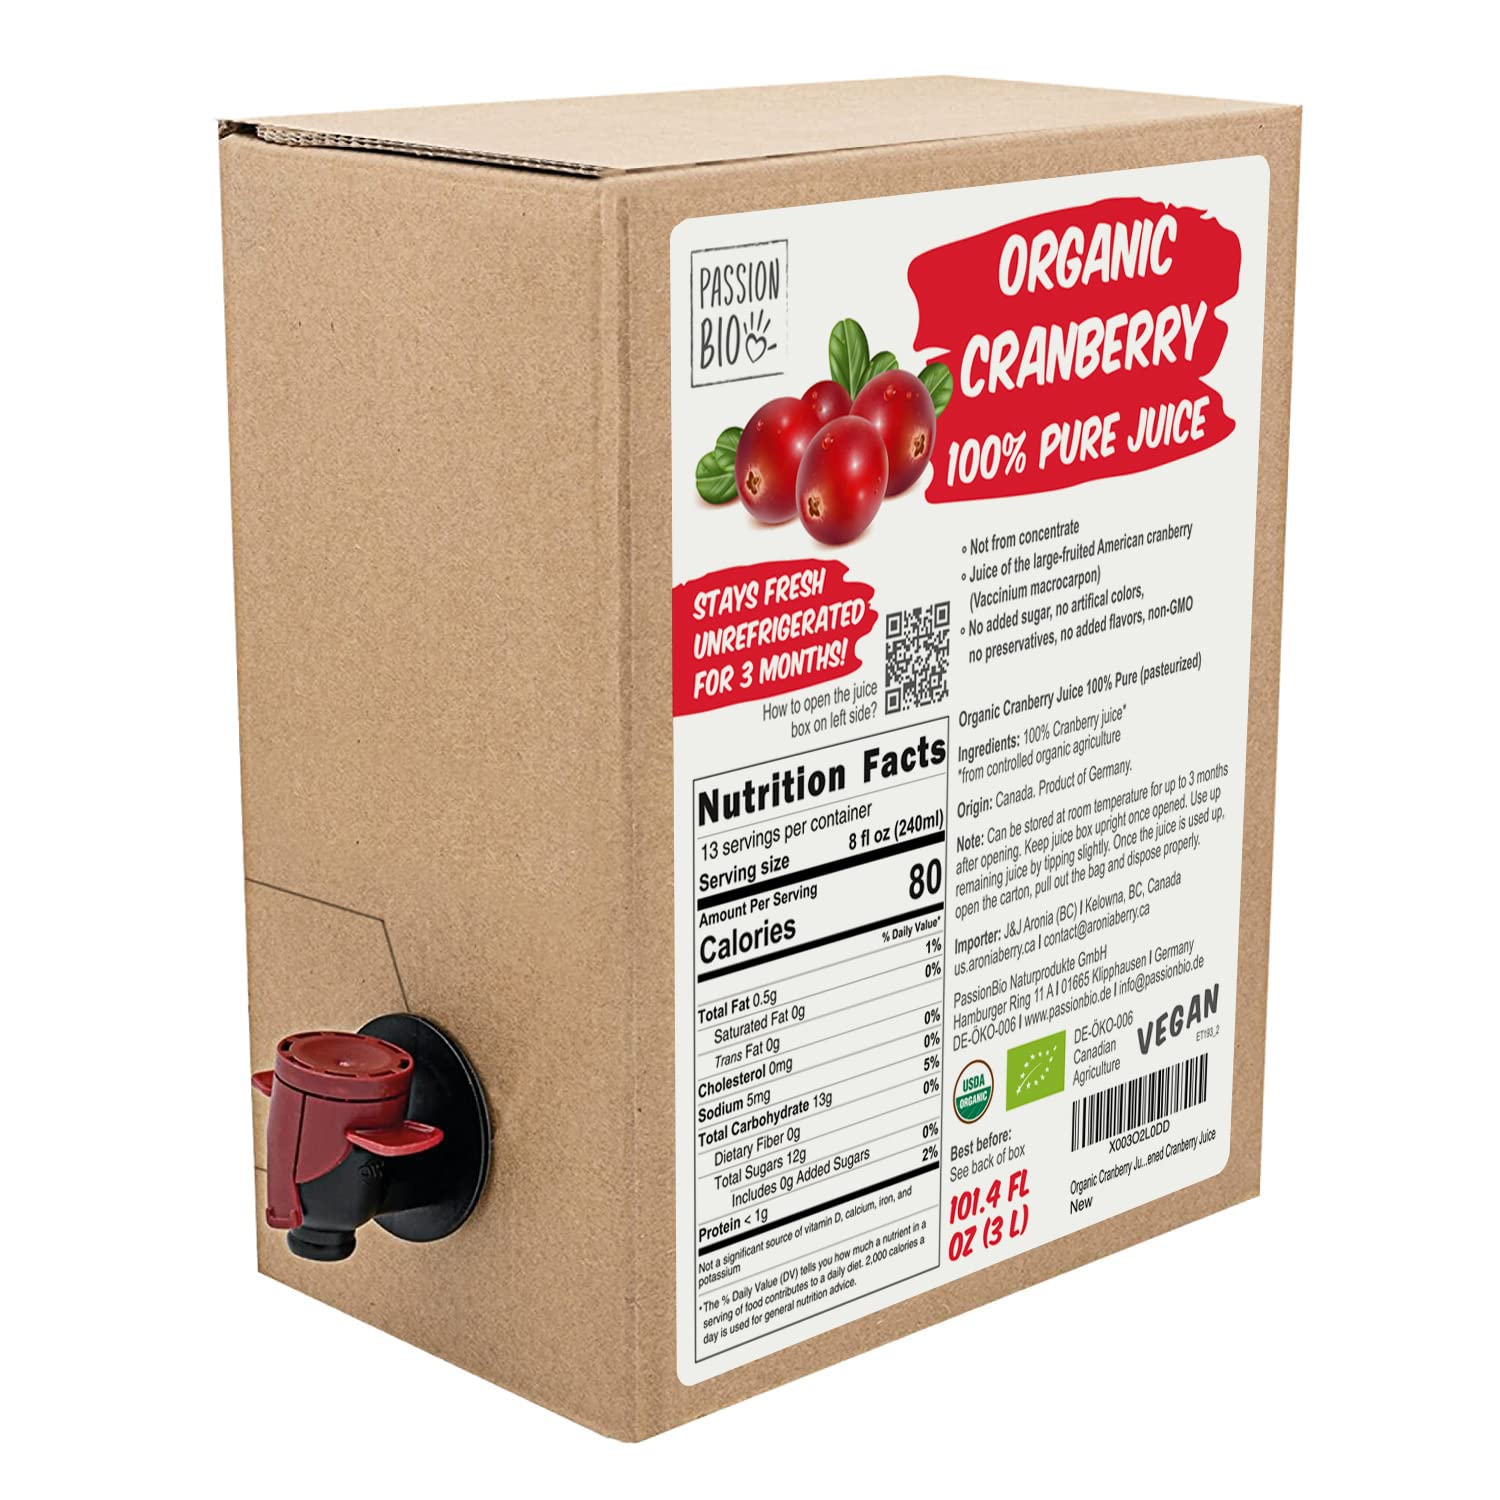 Organic Cranberry Juice Box 101.4 Fl Oz | 100% Pure Cranberry Juice, No Added Sugar, Not From Concentrate | Vegan, Organic, Non GMO, Natural Unsweetened Cranberry Juice